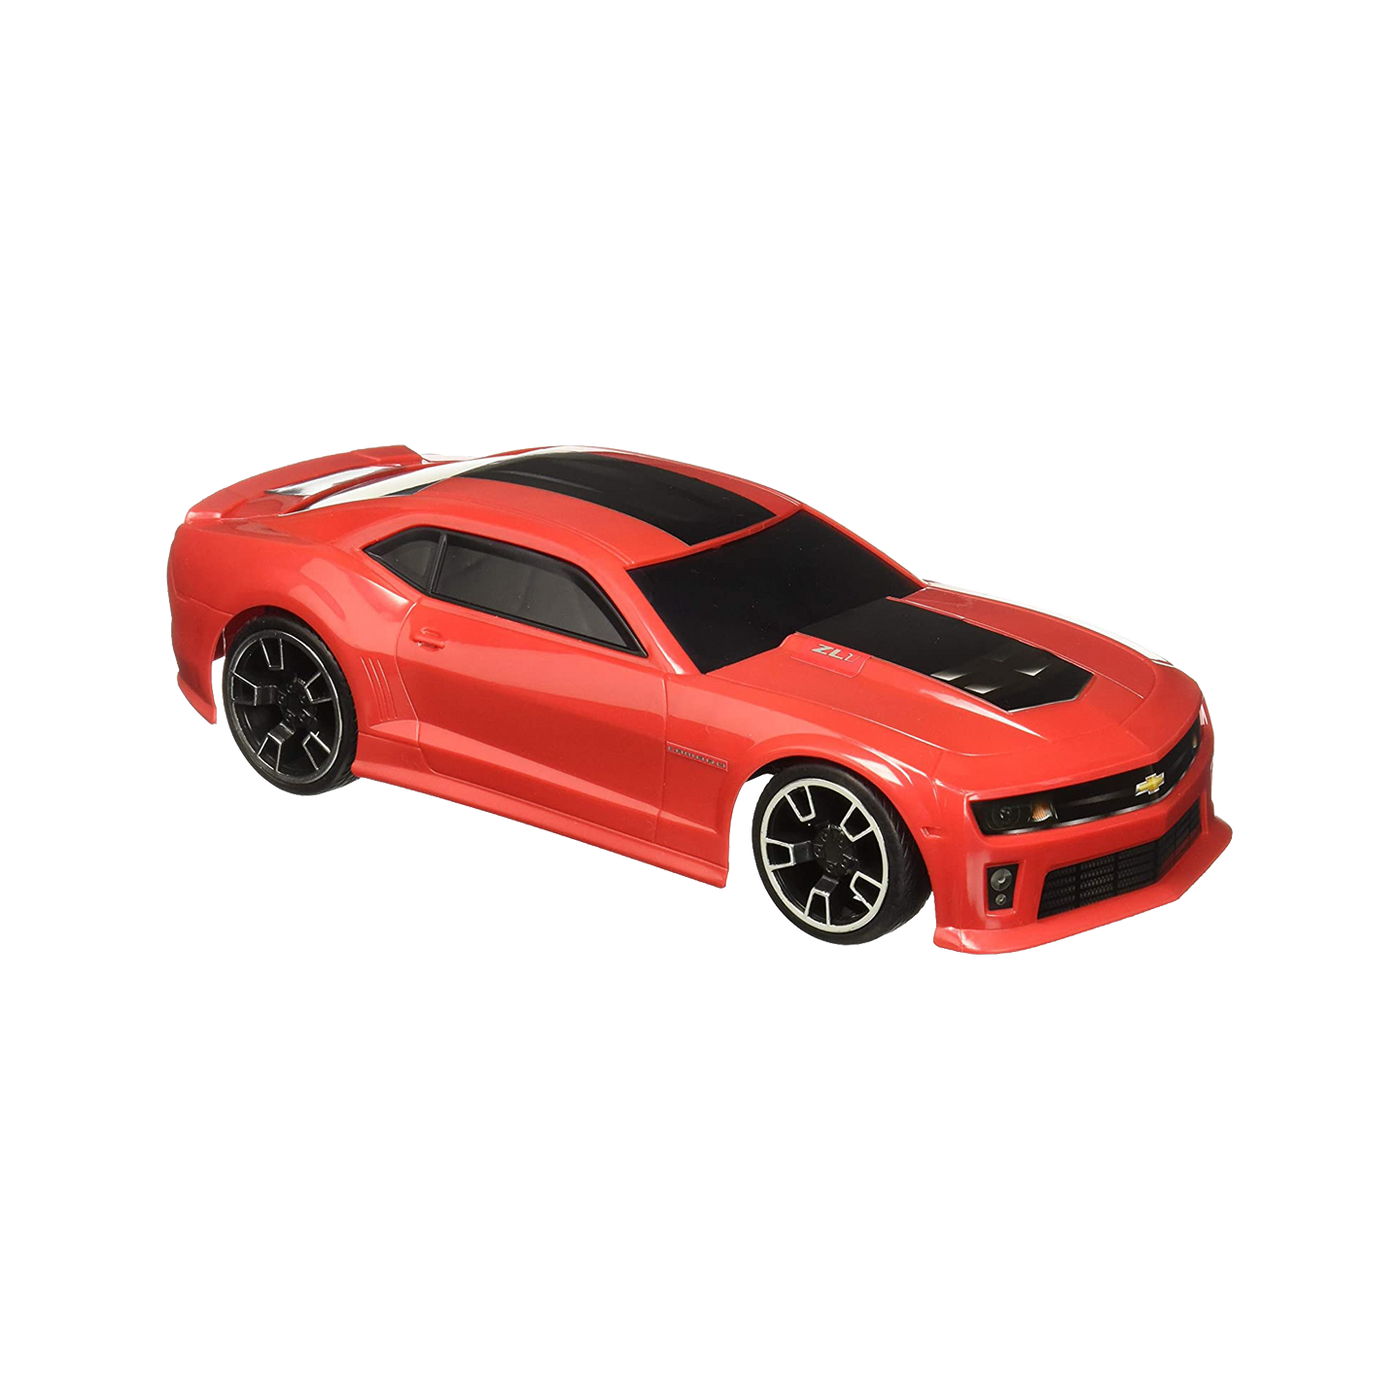 Hot Wheels Remote Control Car, Red ZL1 Camaro RC Vehicle, 2.4 GHz With Range Of 65 Feet